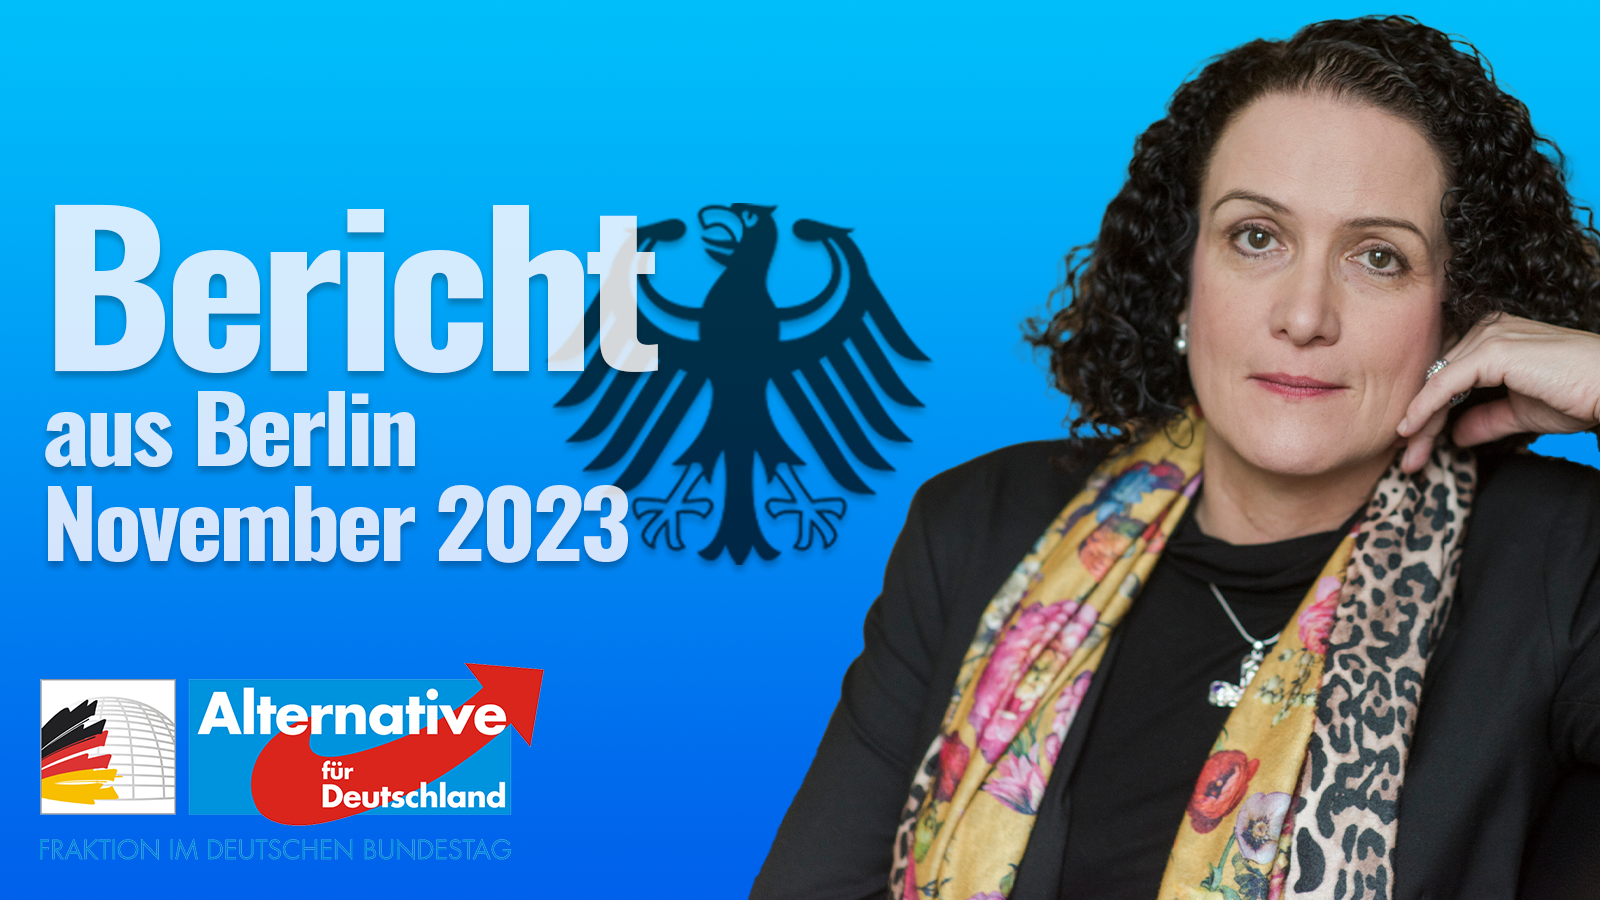 You are currently viewing Bericht aus Berlin November 2023